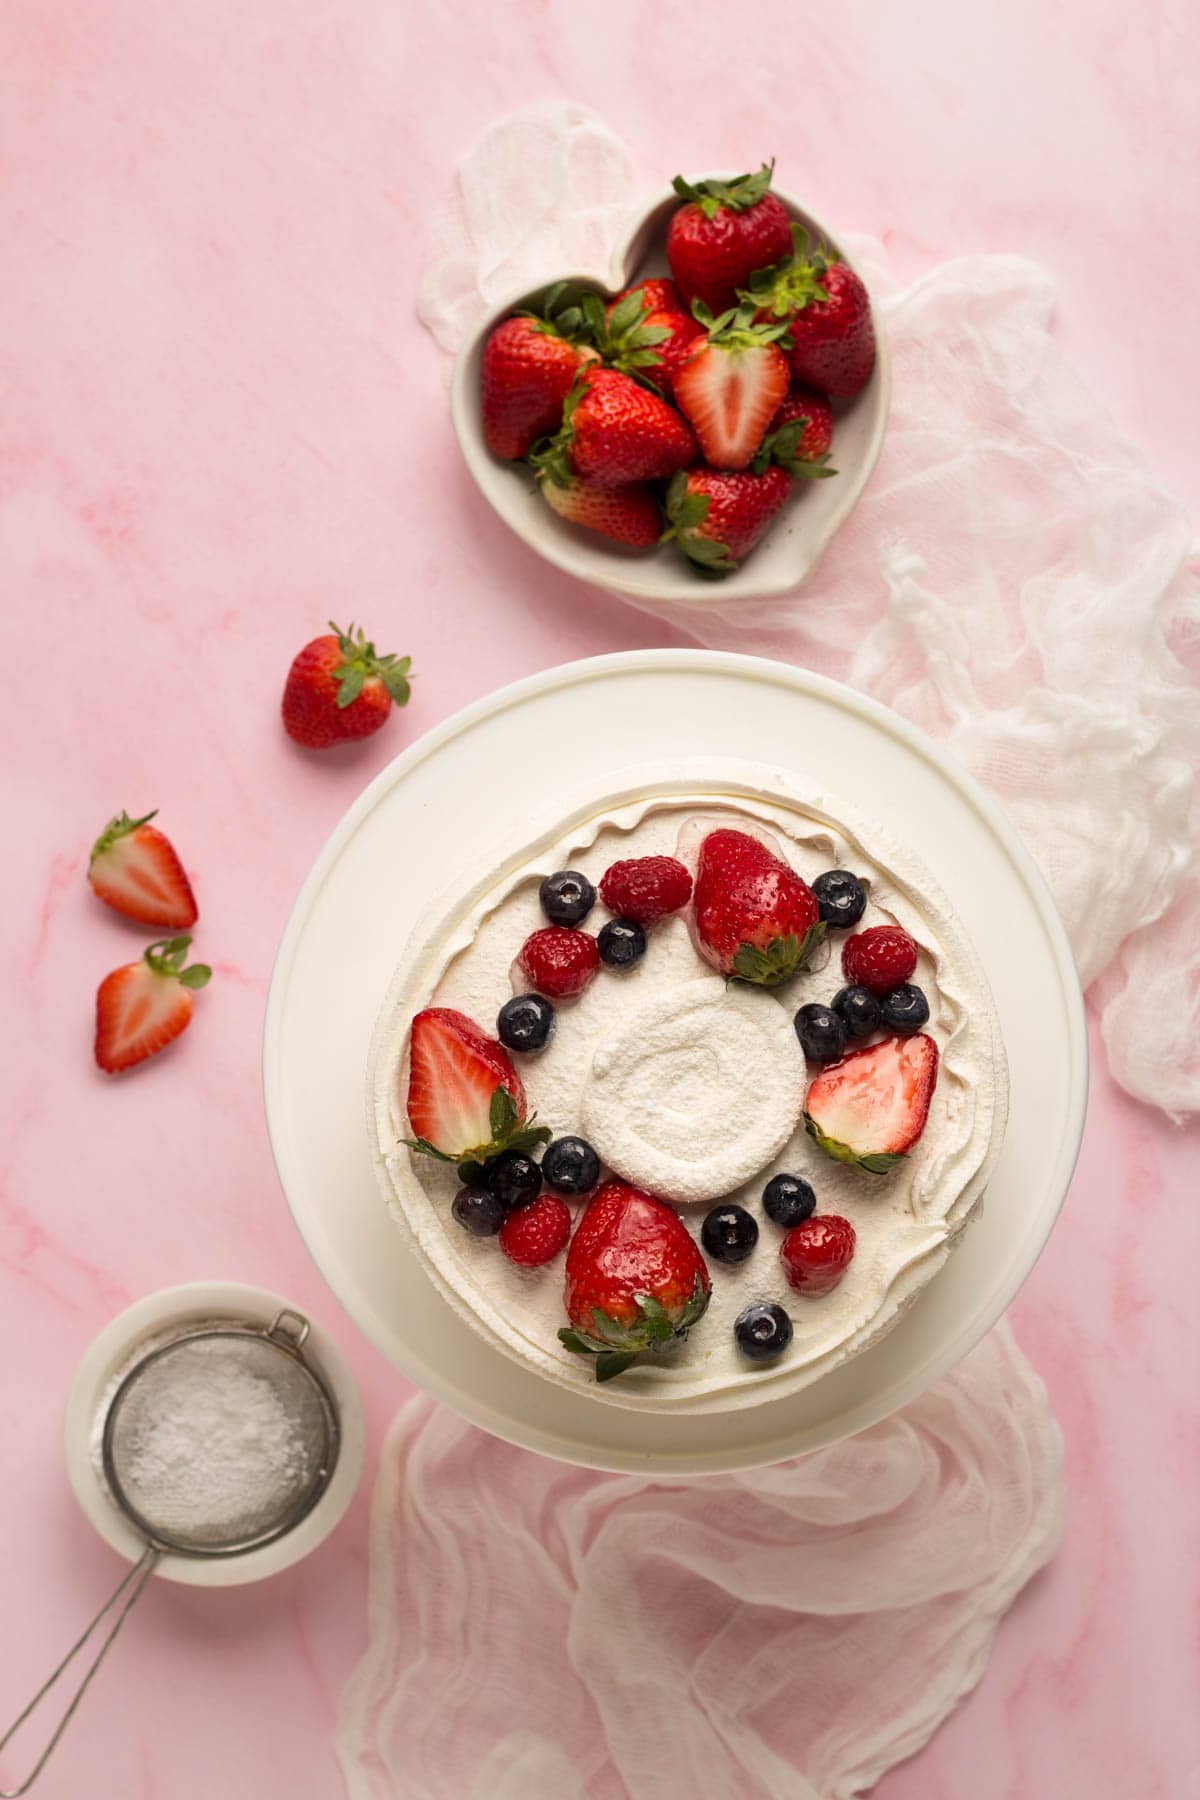 Cake with berries and a bowl of strawberries